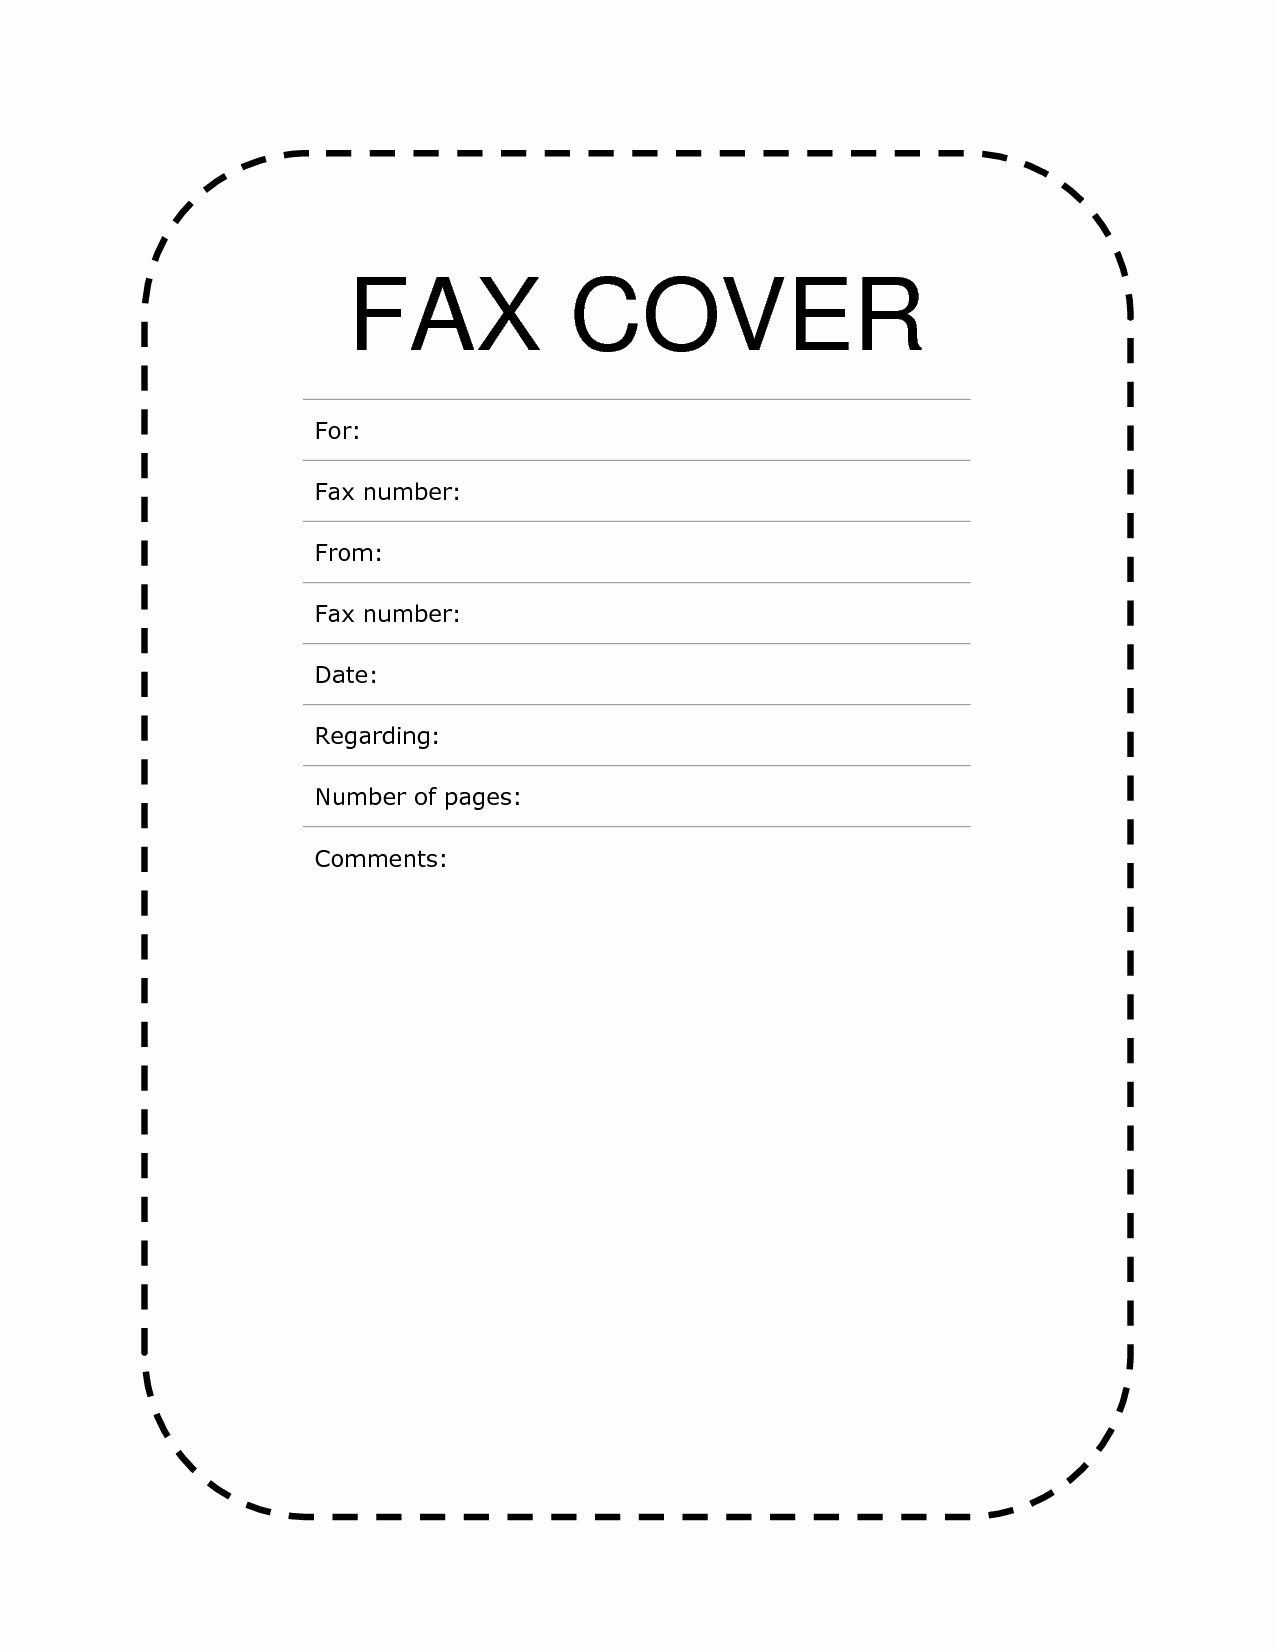 Fax Cover Sheet Template Microsoft Lovely [free] Fax Cover Sheet Template